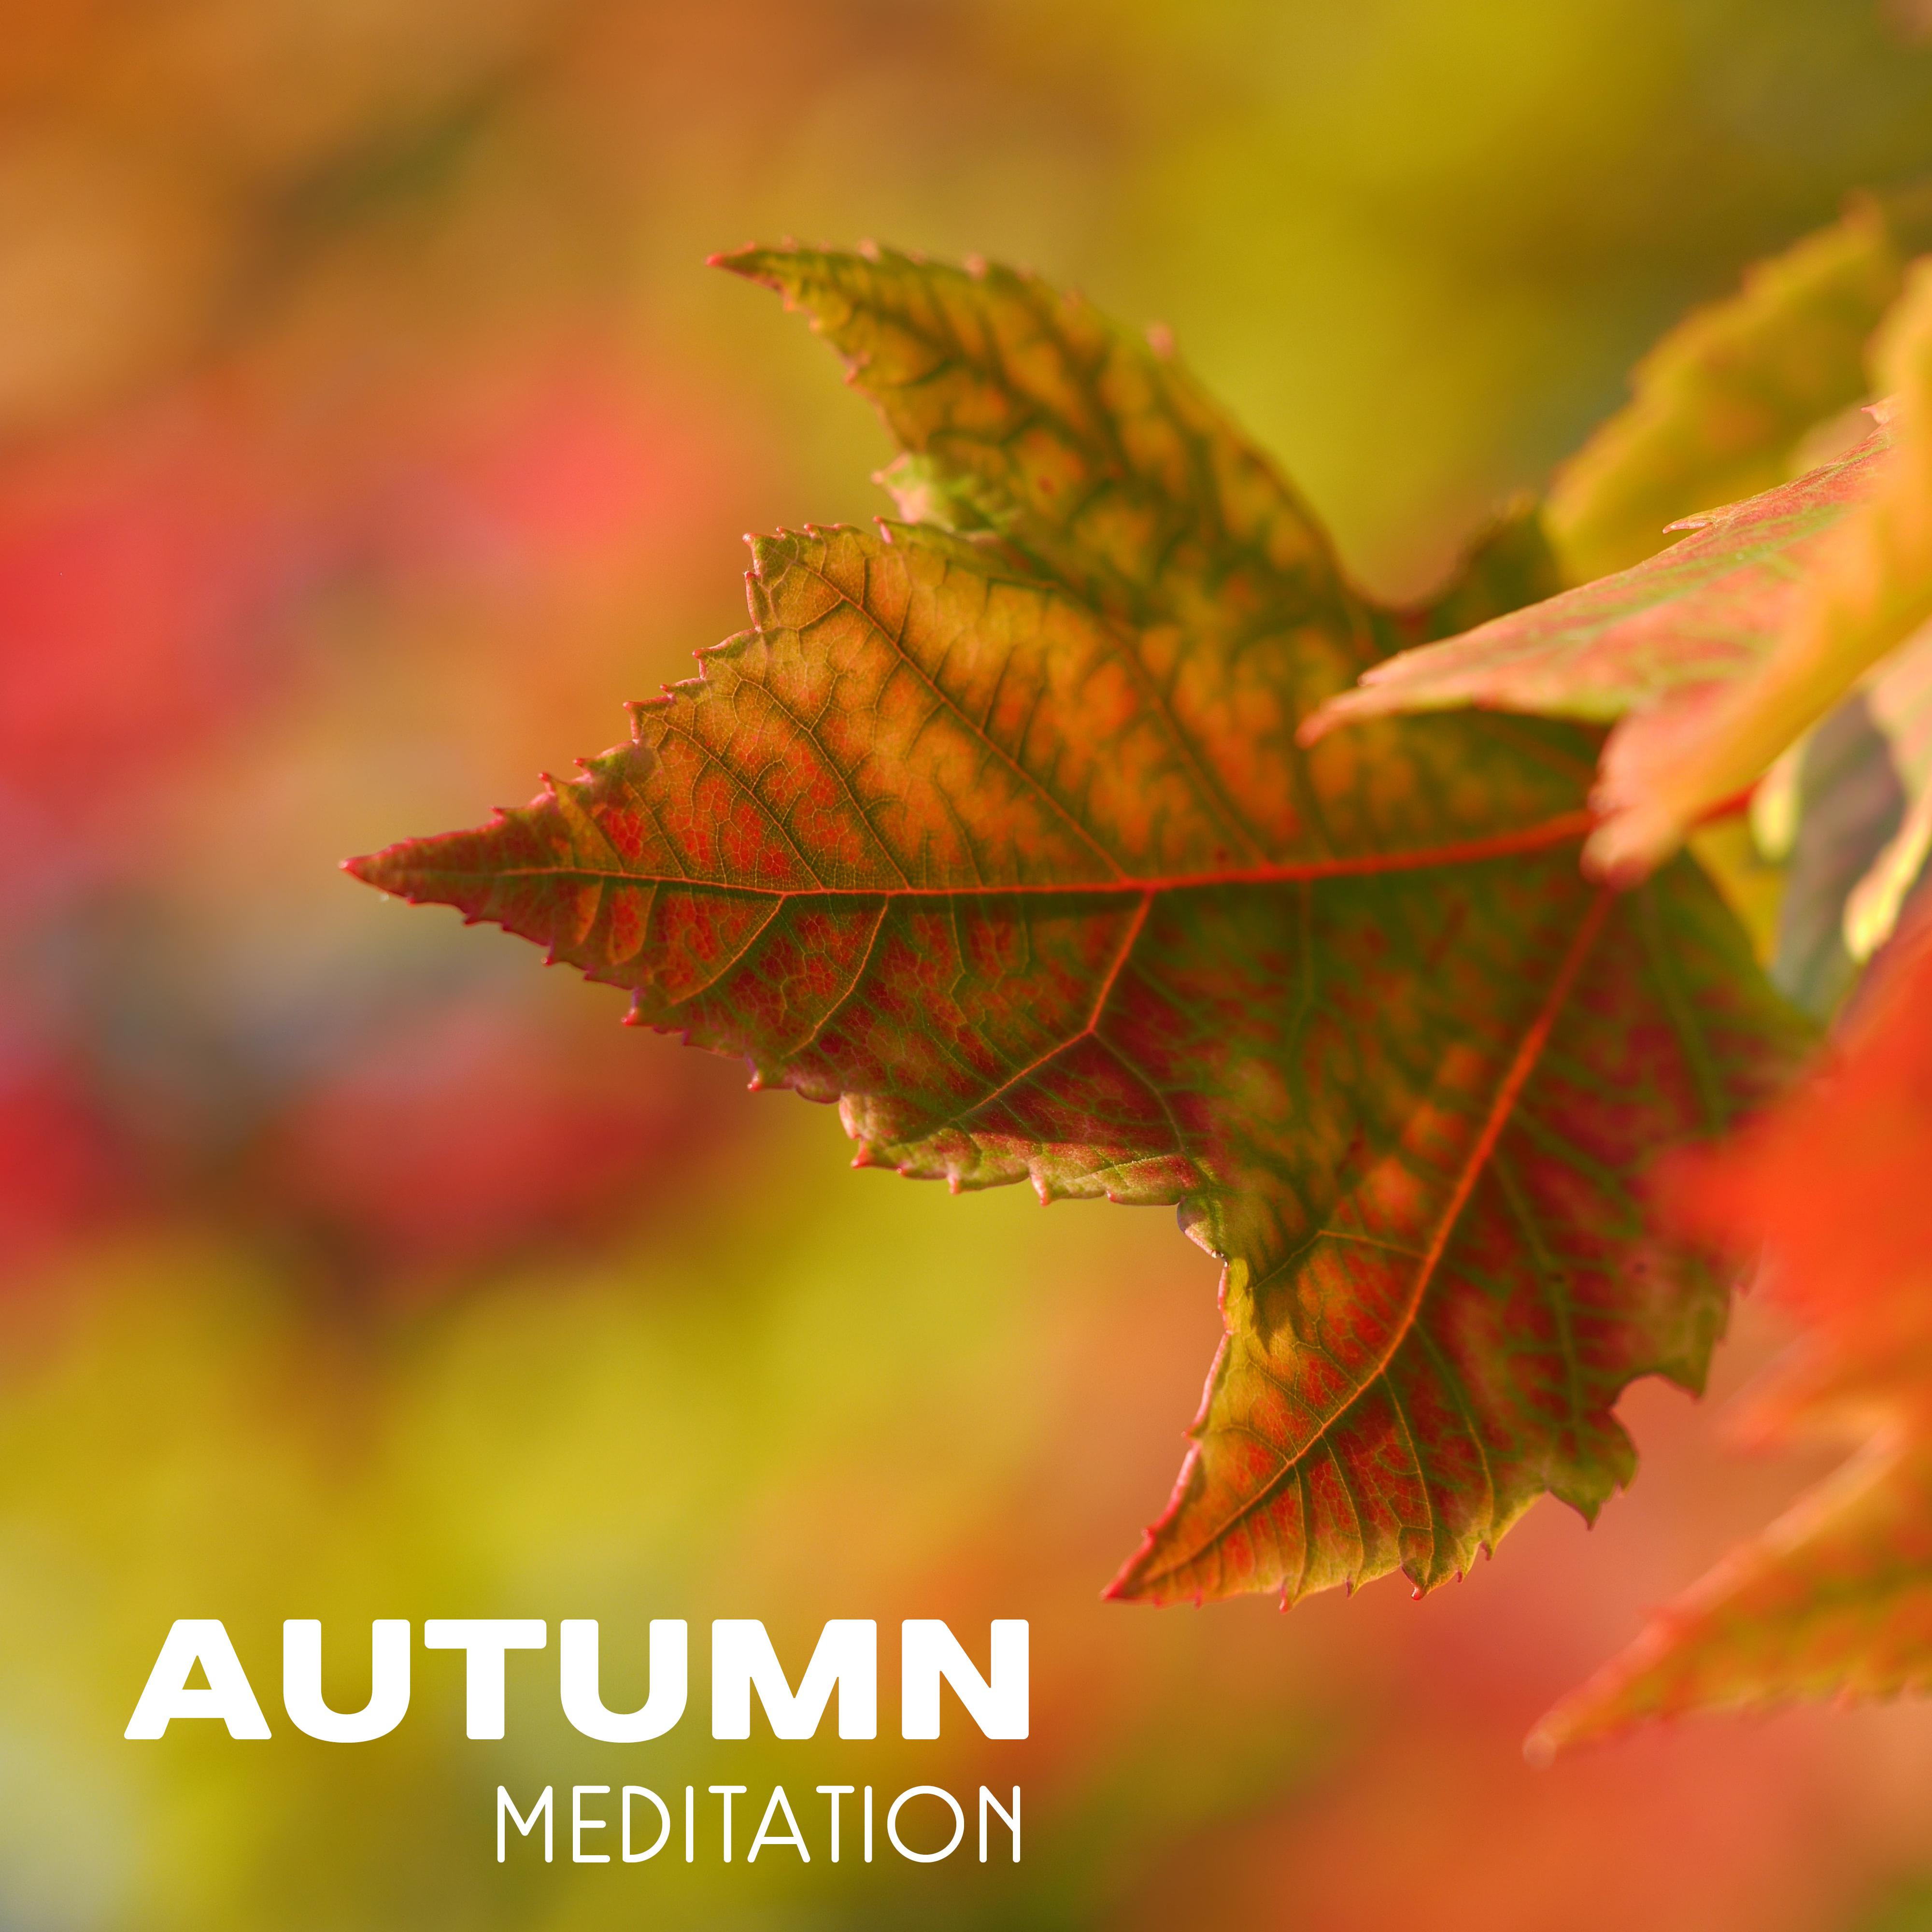 Autumn Meditation – Music for Yoga, Meditaion, Mantra, Mindfulness Training, Relaxation with Nature Sounds